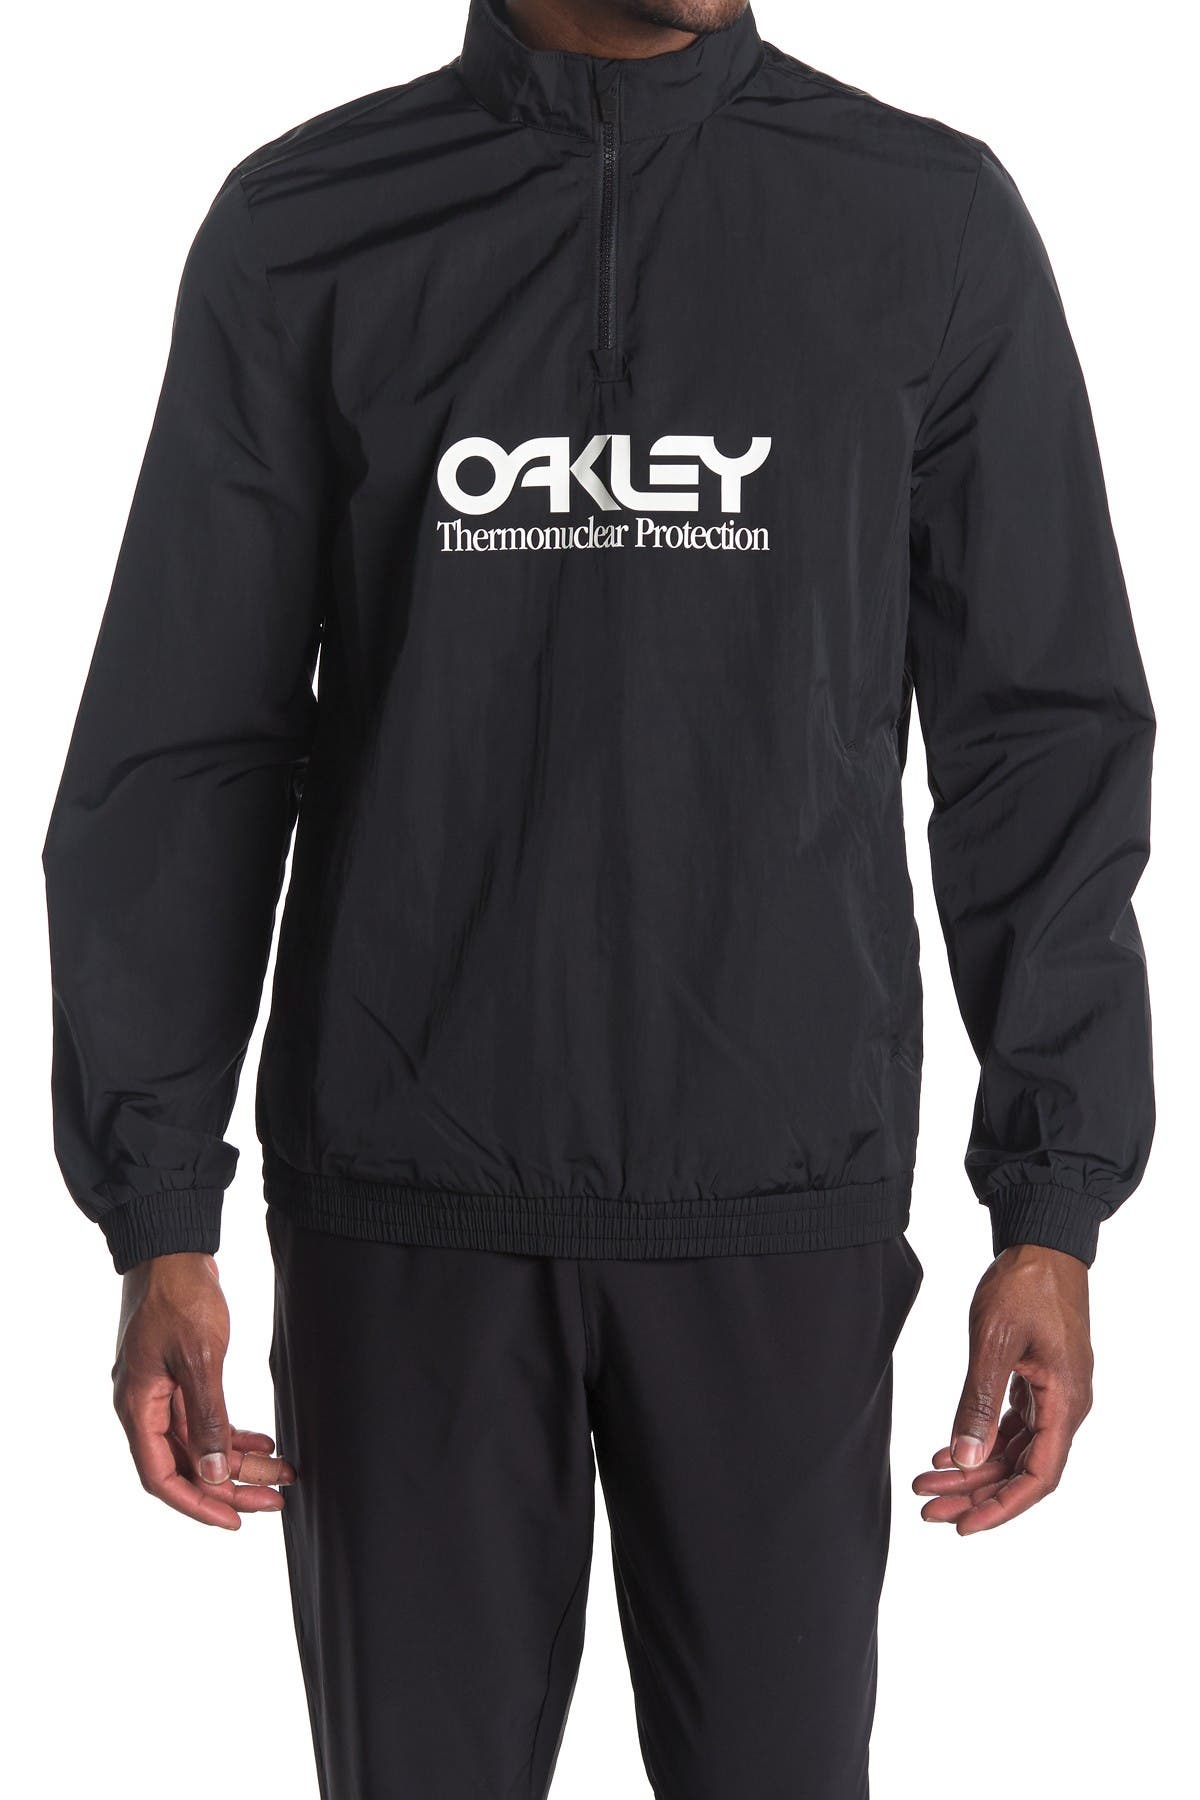 oakley thermonuclear protection